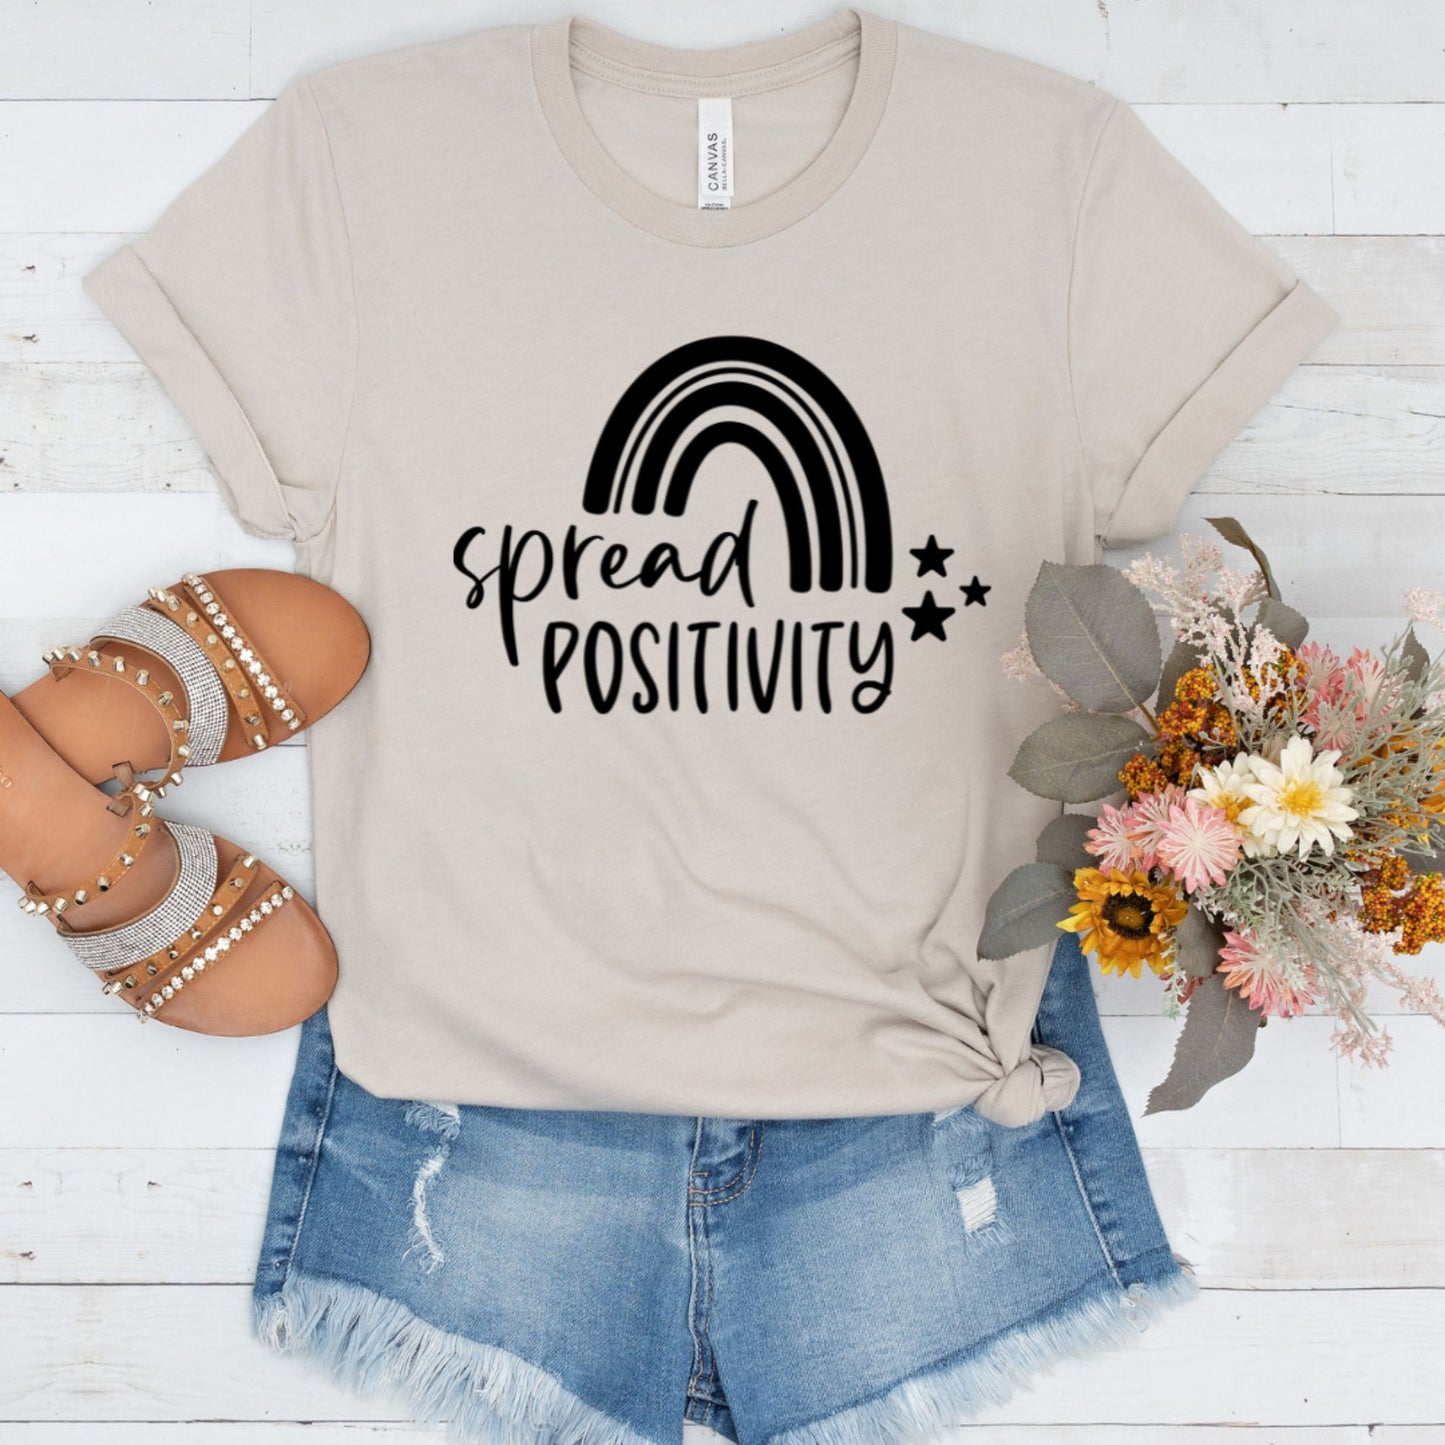 "Spread Positivity" T-shirt - Inspire Others with Words of Kindness and Joy